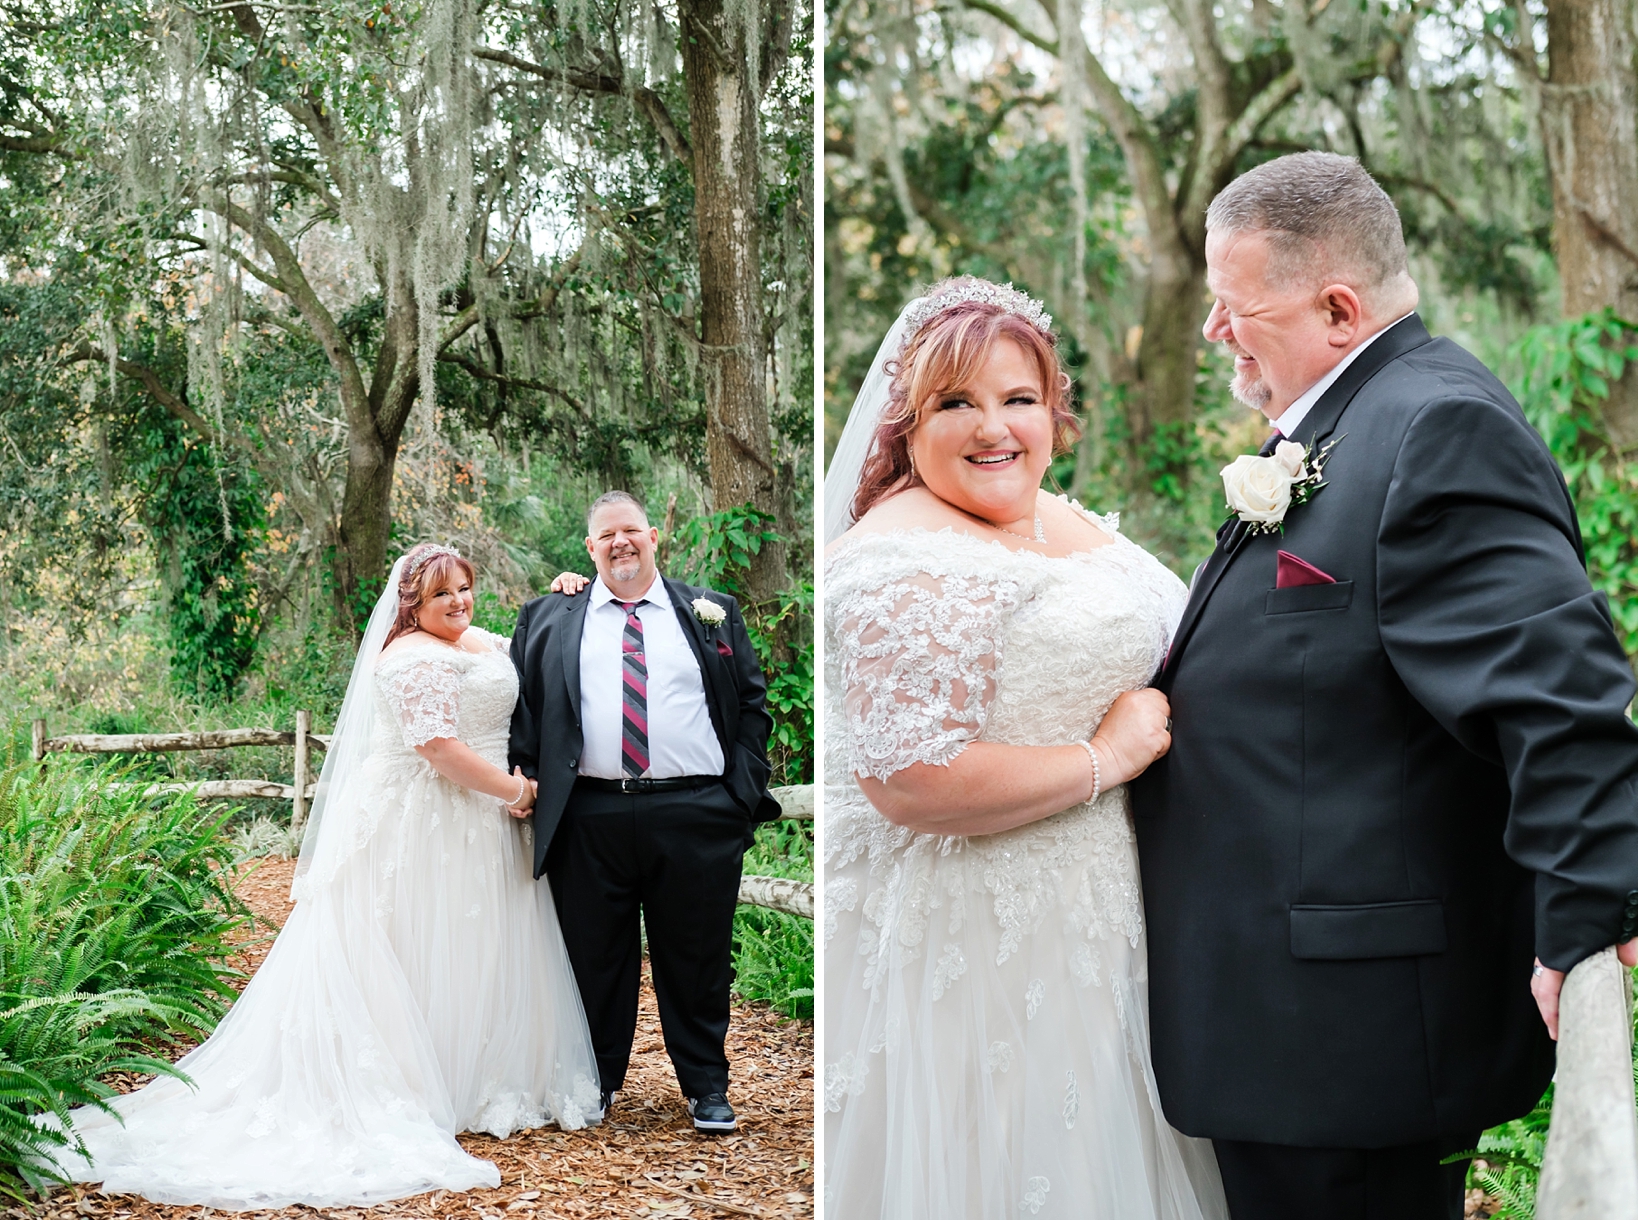 Formal portraits of the Bride and Groom in Seffner, FL